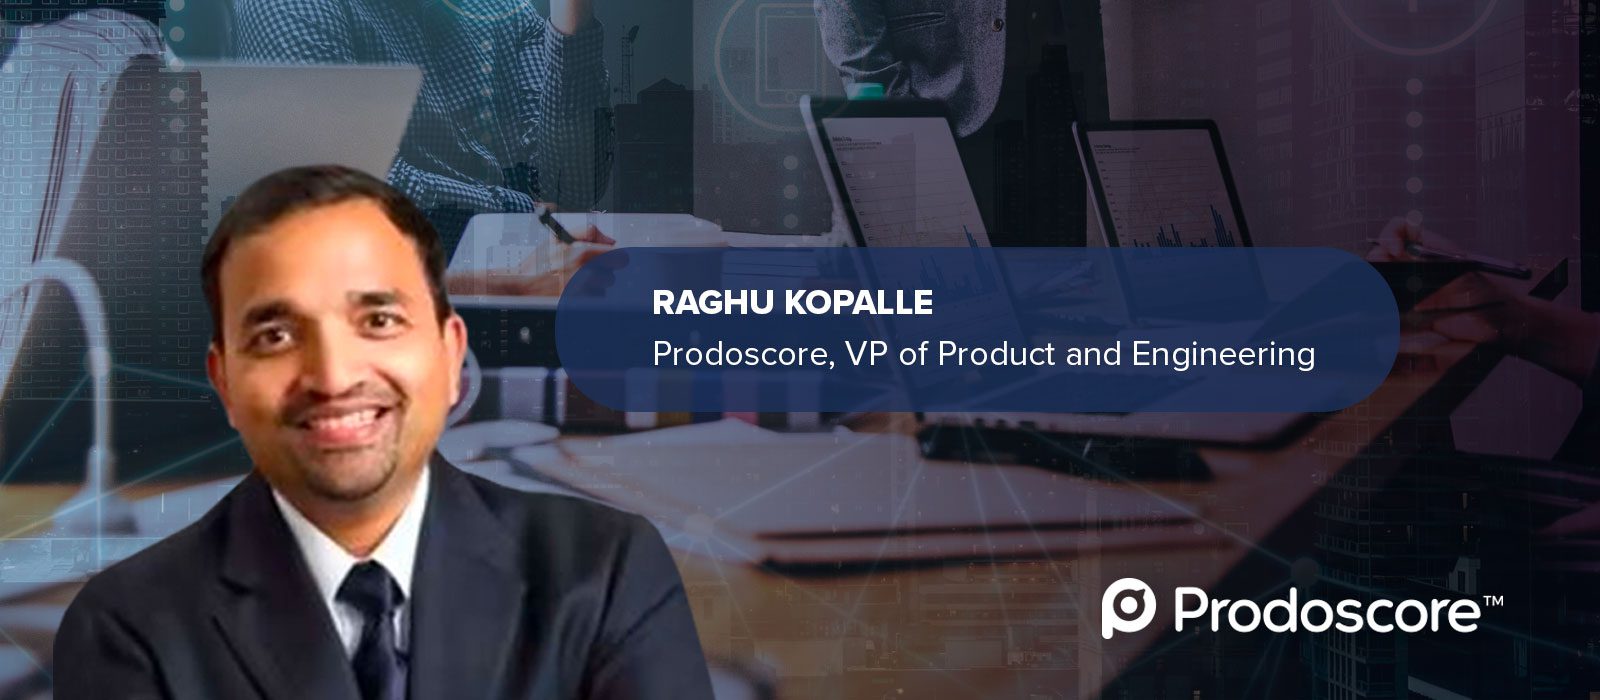 Prodoscore Announces Veteran Technologist Raghu Kopalle as Executive Vice President of Product and Engineering